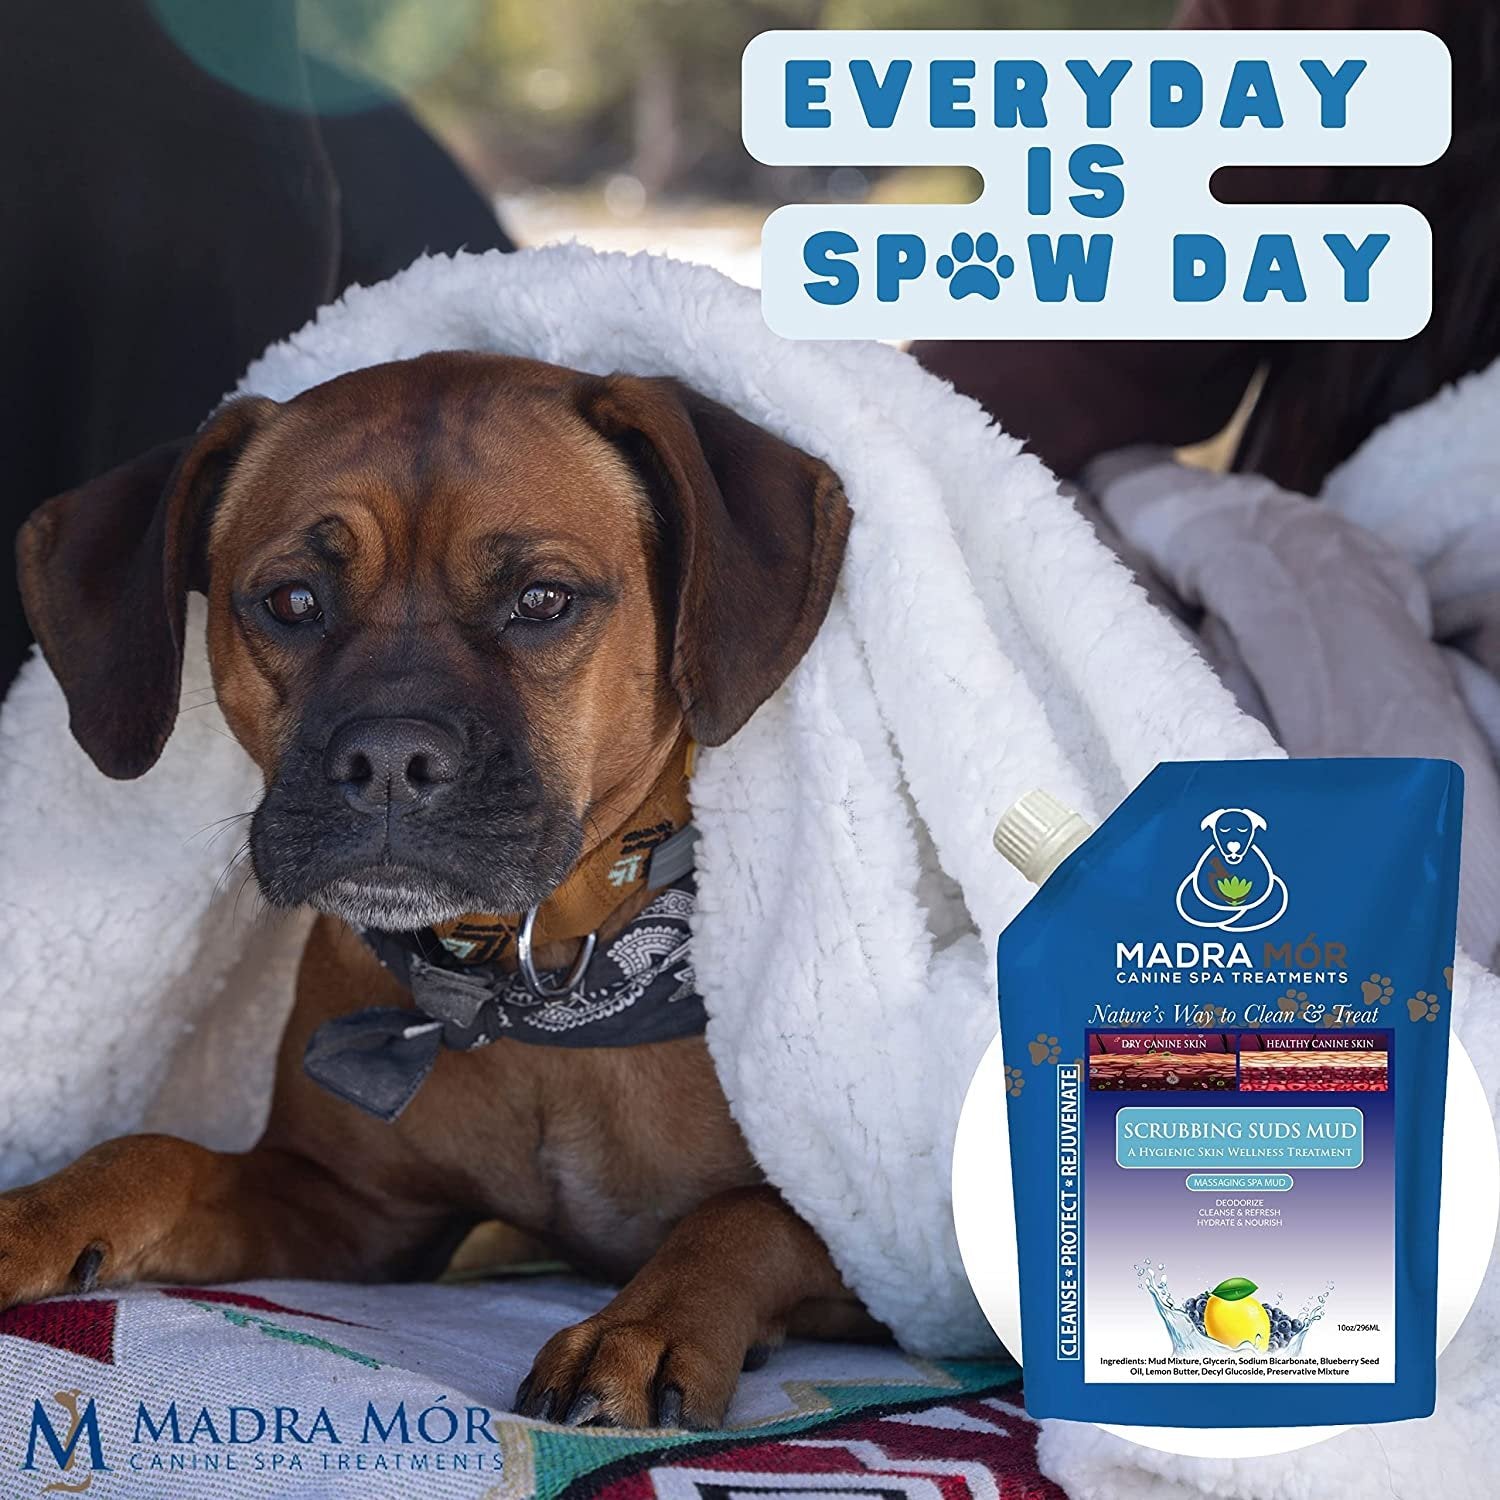 Madra Mor Scrubbing Suds Dog Essentials Spa Mud | Dog Bath for Dog Grooming | Dry Skin for Dogs Treatment | Dog Coat Skin Care Products | 10oz Pouch w Worldwide Nutrition Multi Purpose Key Chain